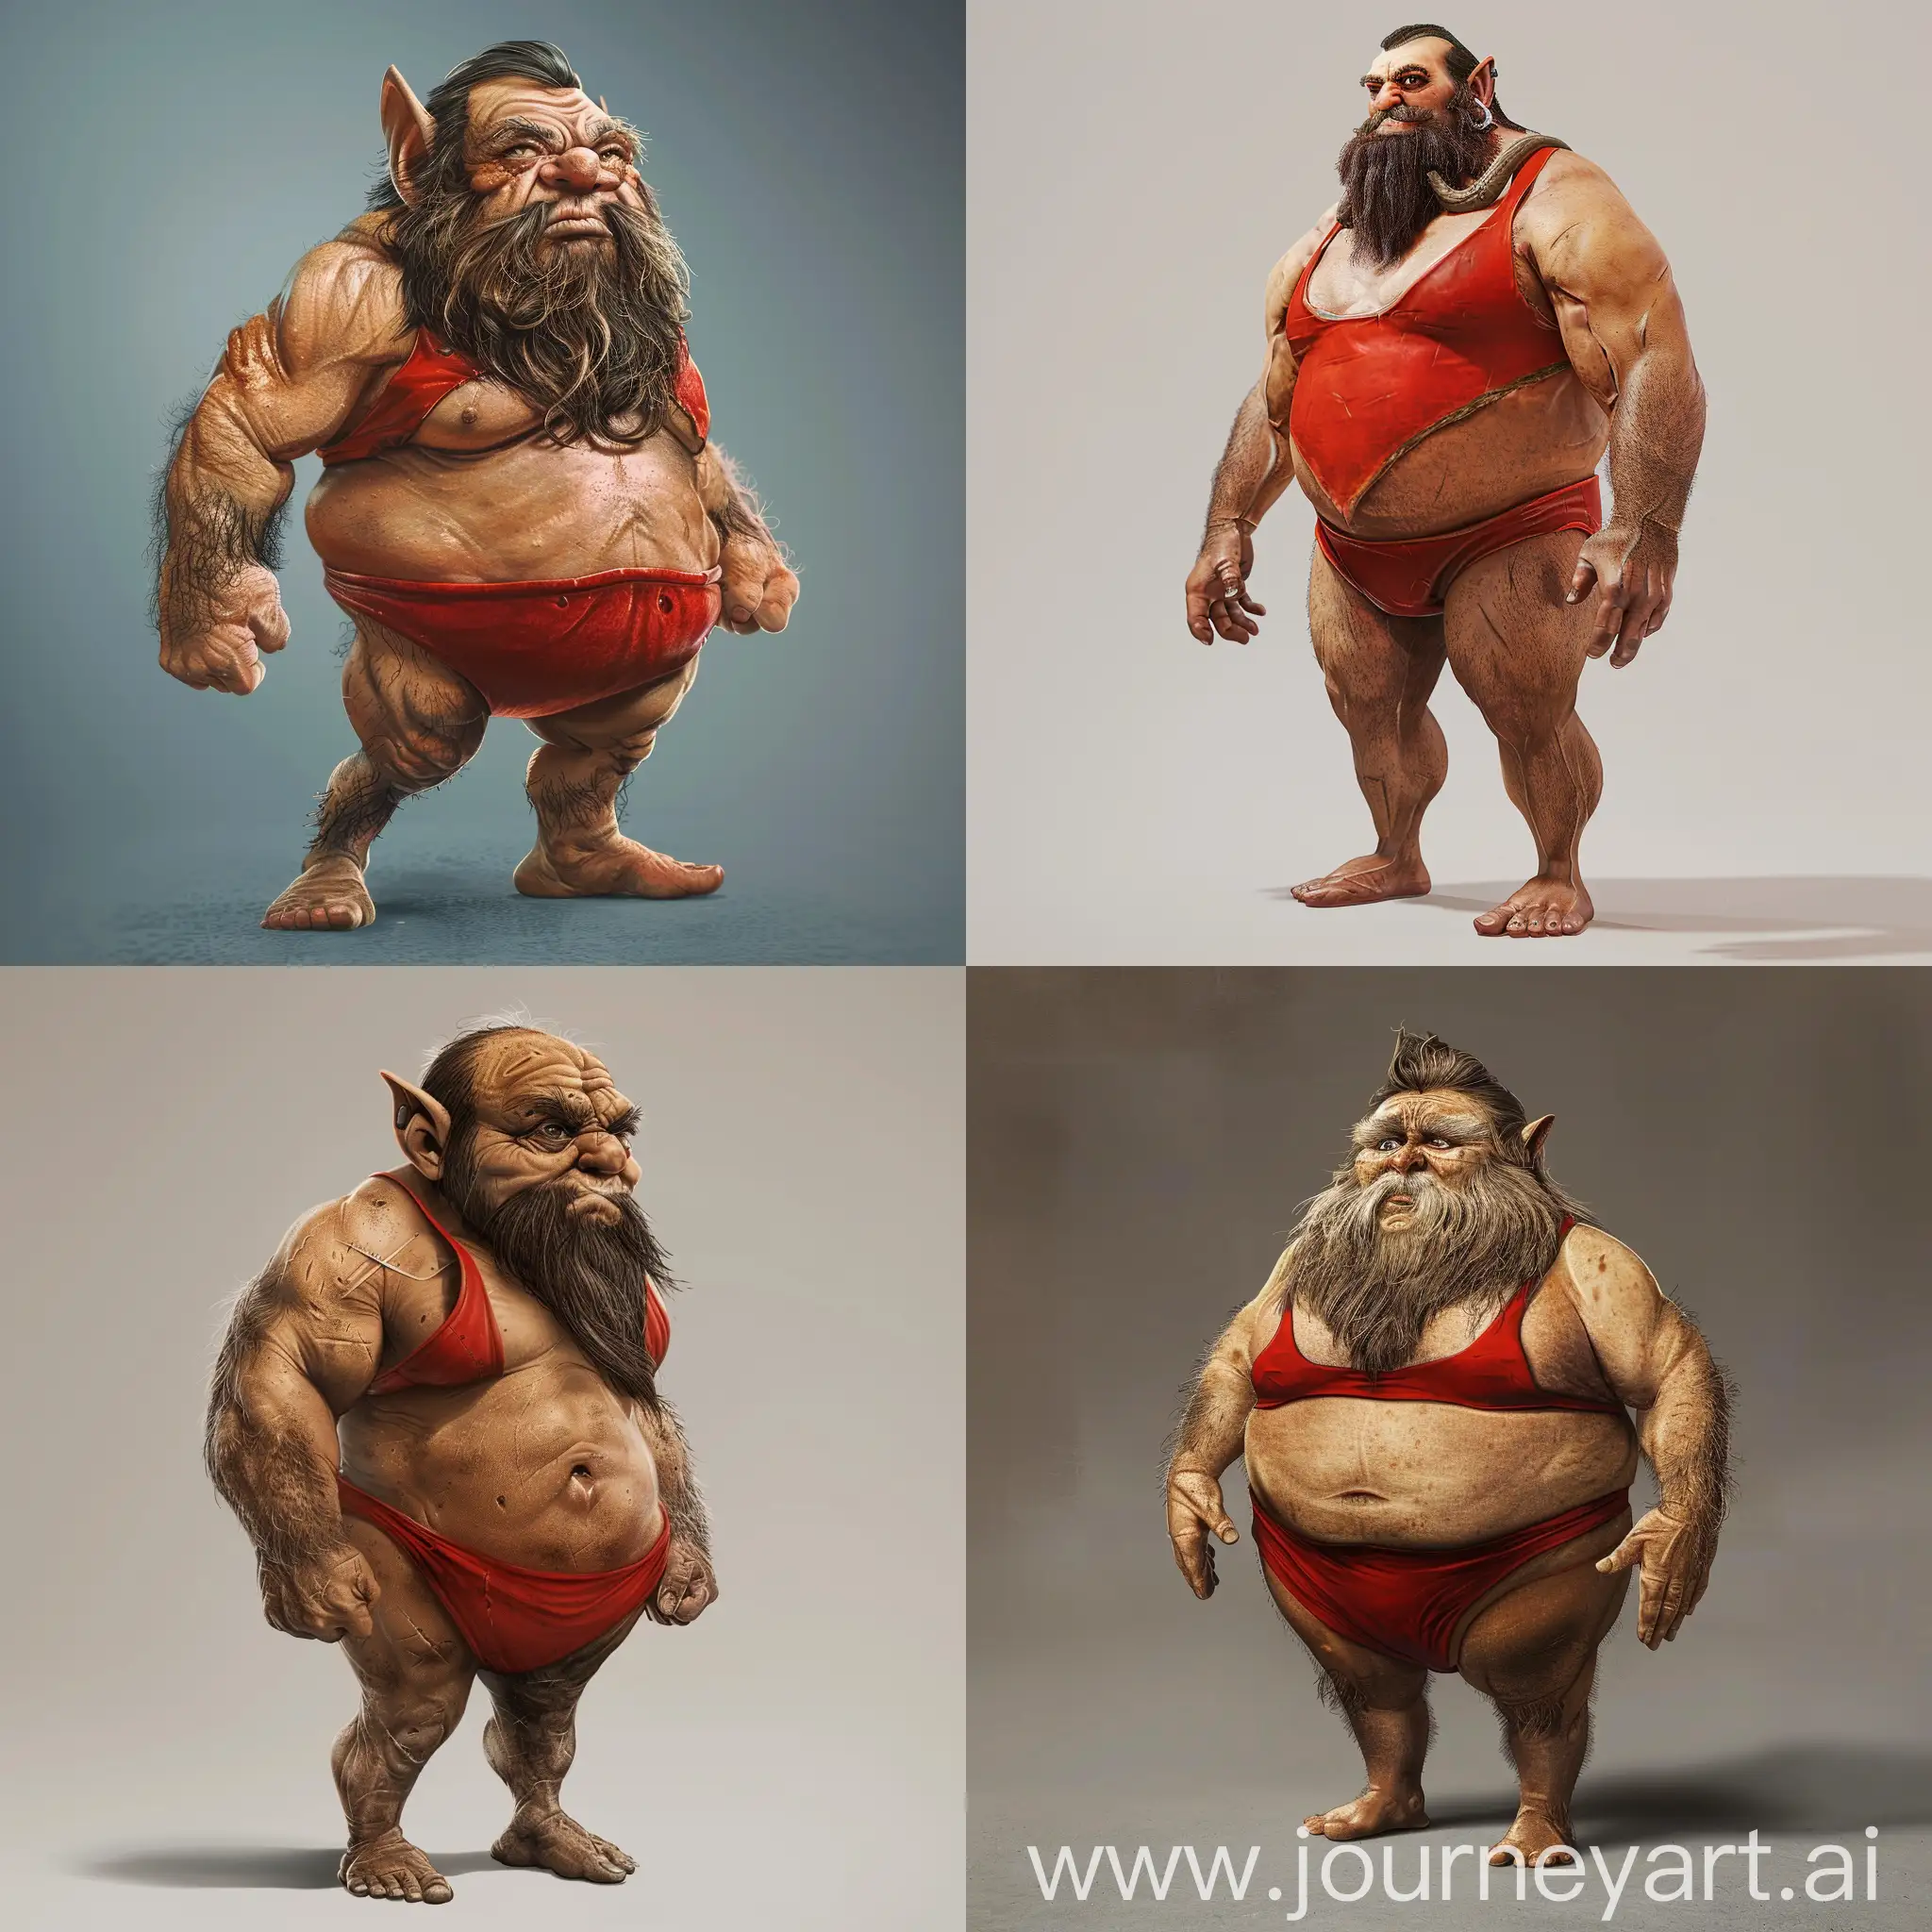 I'd like a photo realistic picture of a mountain dwarf barbarian. He is wearing a red one piece swimsuit. He is surly and a bit overweight.